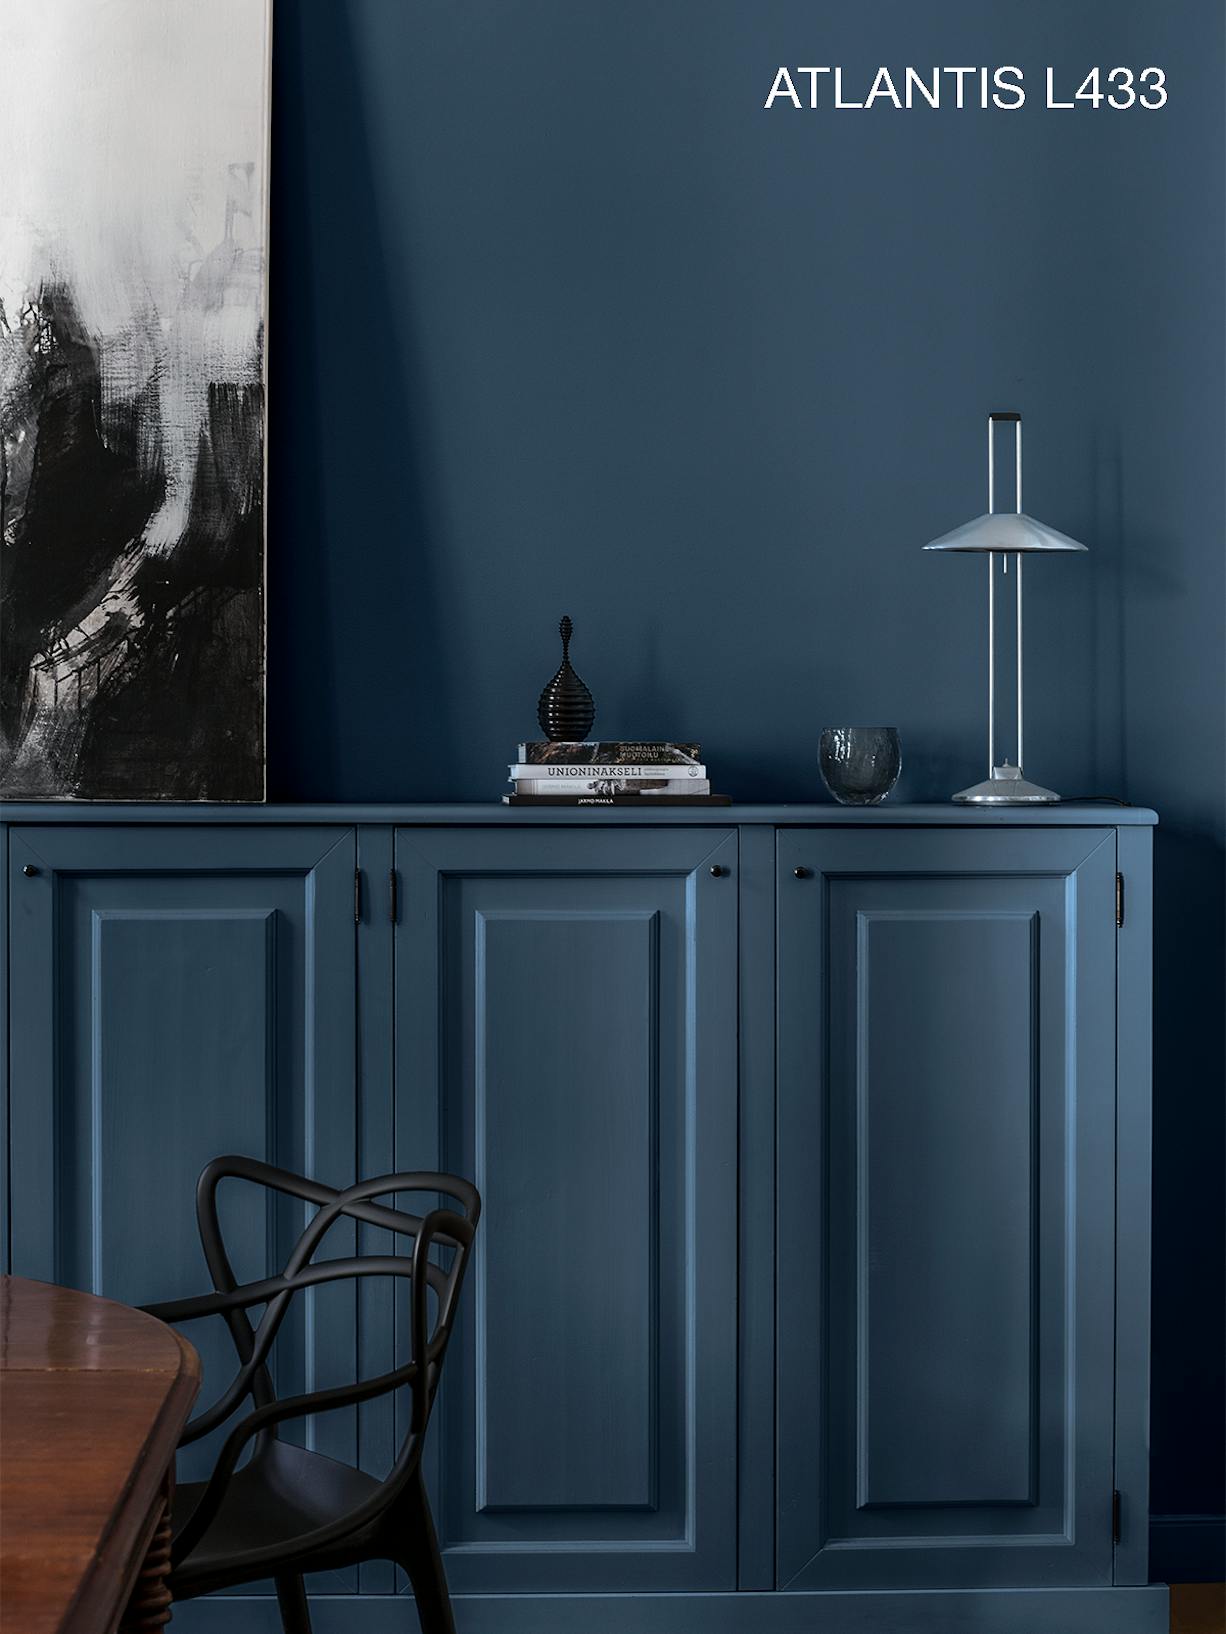 Deep Blue Cabinet Against Same Coloured Wall with Decorations